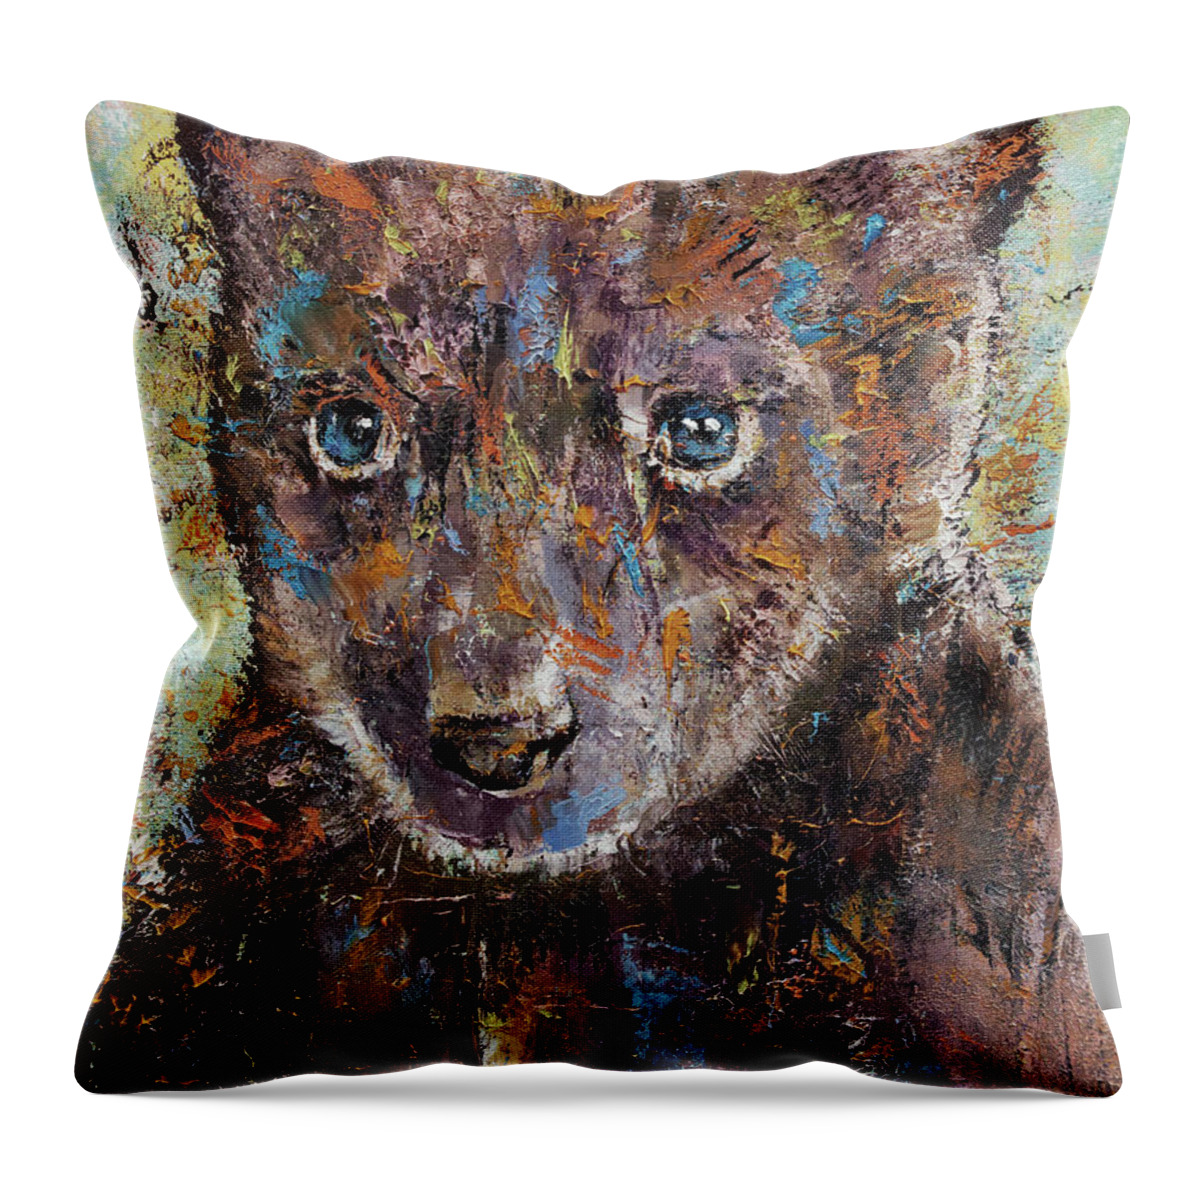 Bear Cub Throw Pillow featuring the painting Baby Bear by Michael Creese